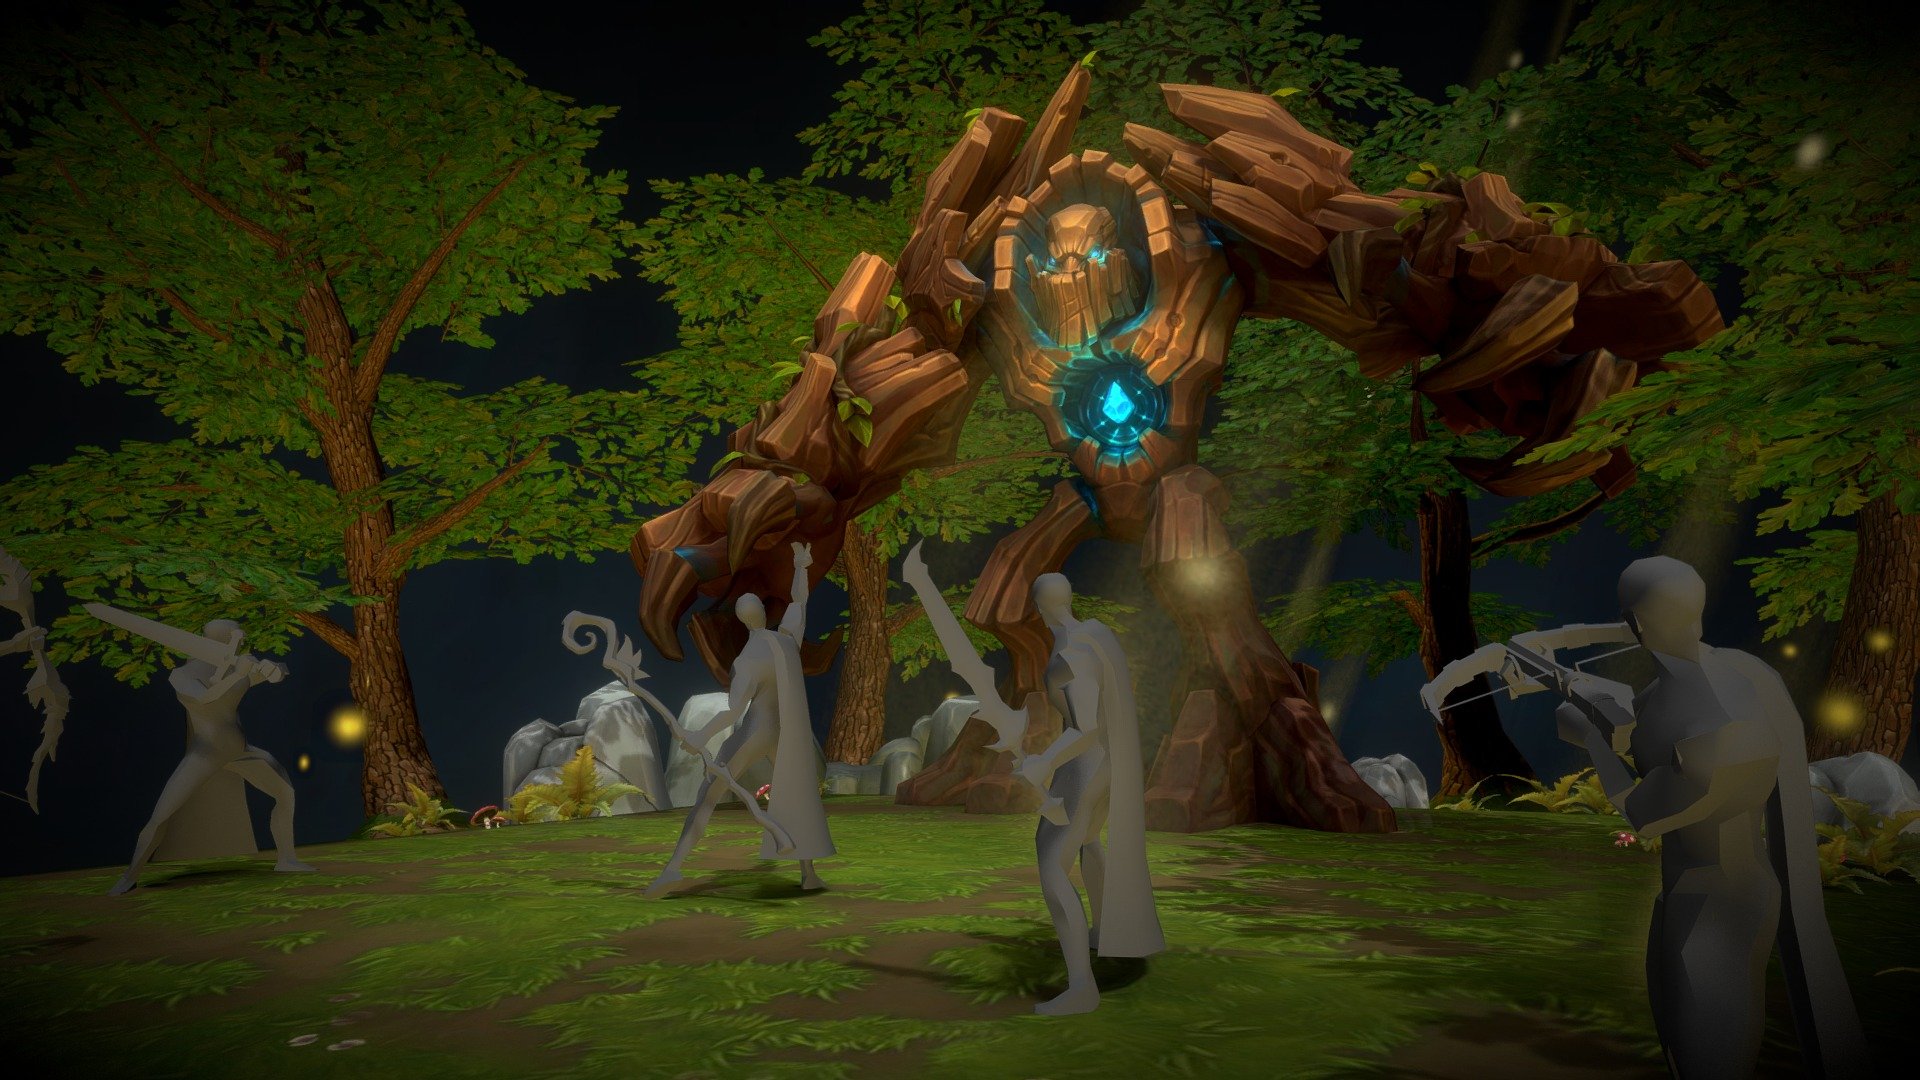 Solak, the Guardian of the Grove!
Responsible for both the concept and 3d model.
https://www.artstation.com/artwork/PwYDn

Content Developer + story:
- Kyle Robson / Mod Ramen - https://twitter.com/jagexramen

Animators:
- Hing Chan (rigging and animation) - https://www.linkedin.com/in/wing-hing-chan-7aaa9340/
- Victor Gil - http://www.victorgilanimator.com/

Environment artist (responsible for the whole Lost Grove area, including Solak's arena):
- Alan O Brien - https://www.artstation.com/alanobrien
(A huge thumbs up to Alan for helping me out with the environment assets I used on the little Solak's diorama) - Solak, Guardian of the Grove - Runescape - 3D model by bernardo cristovao (@bernardocristovao) 3d model